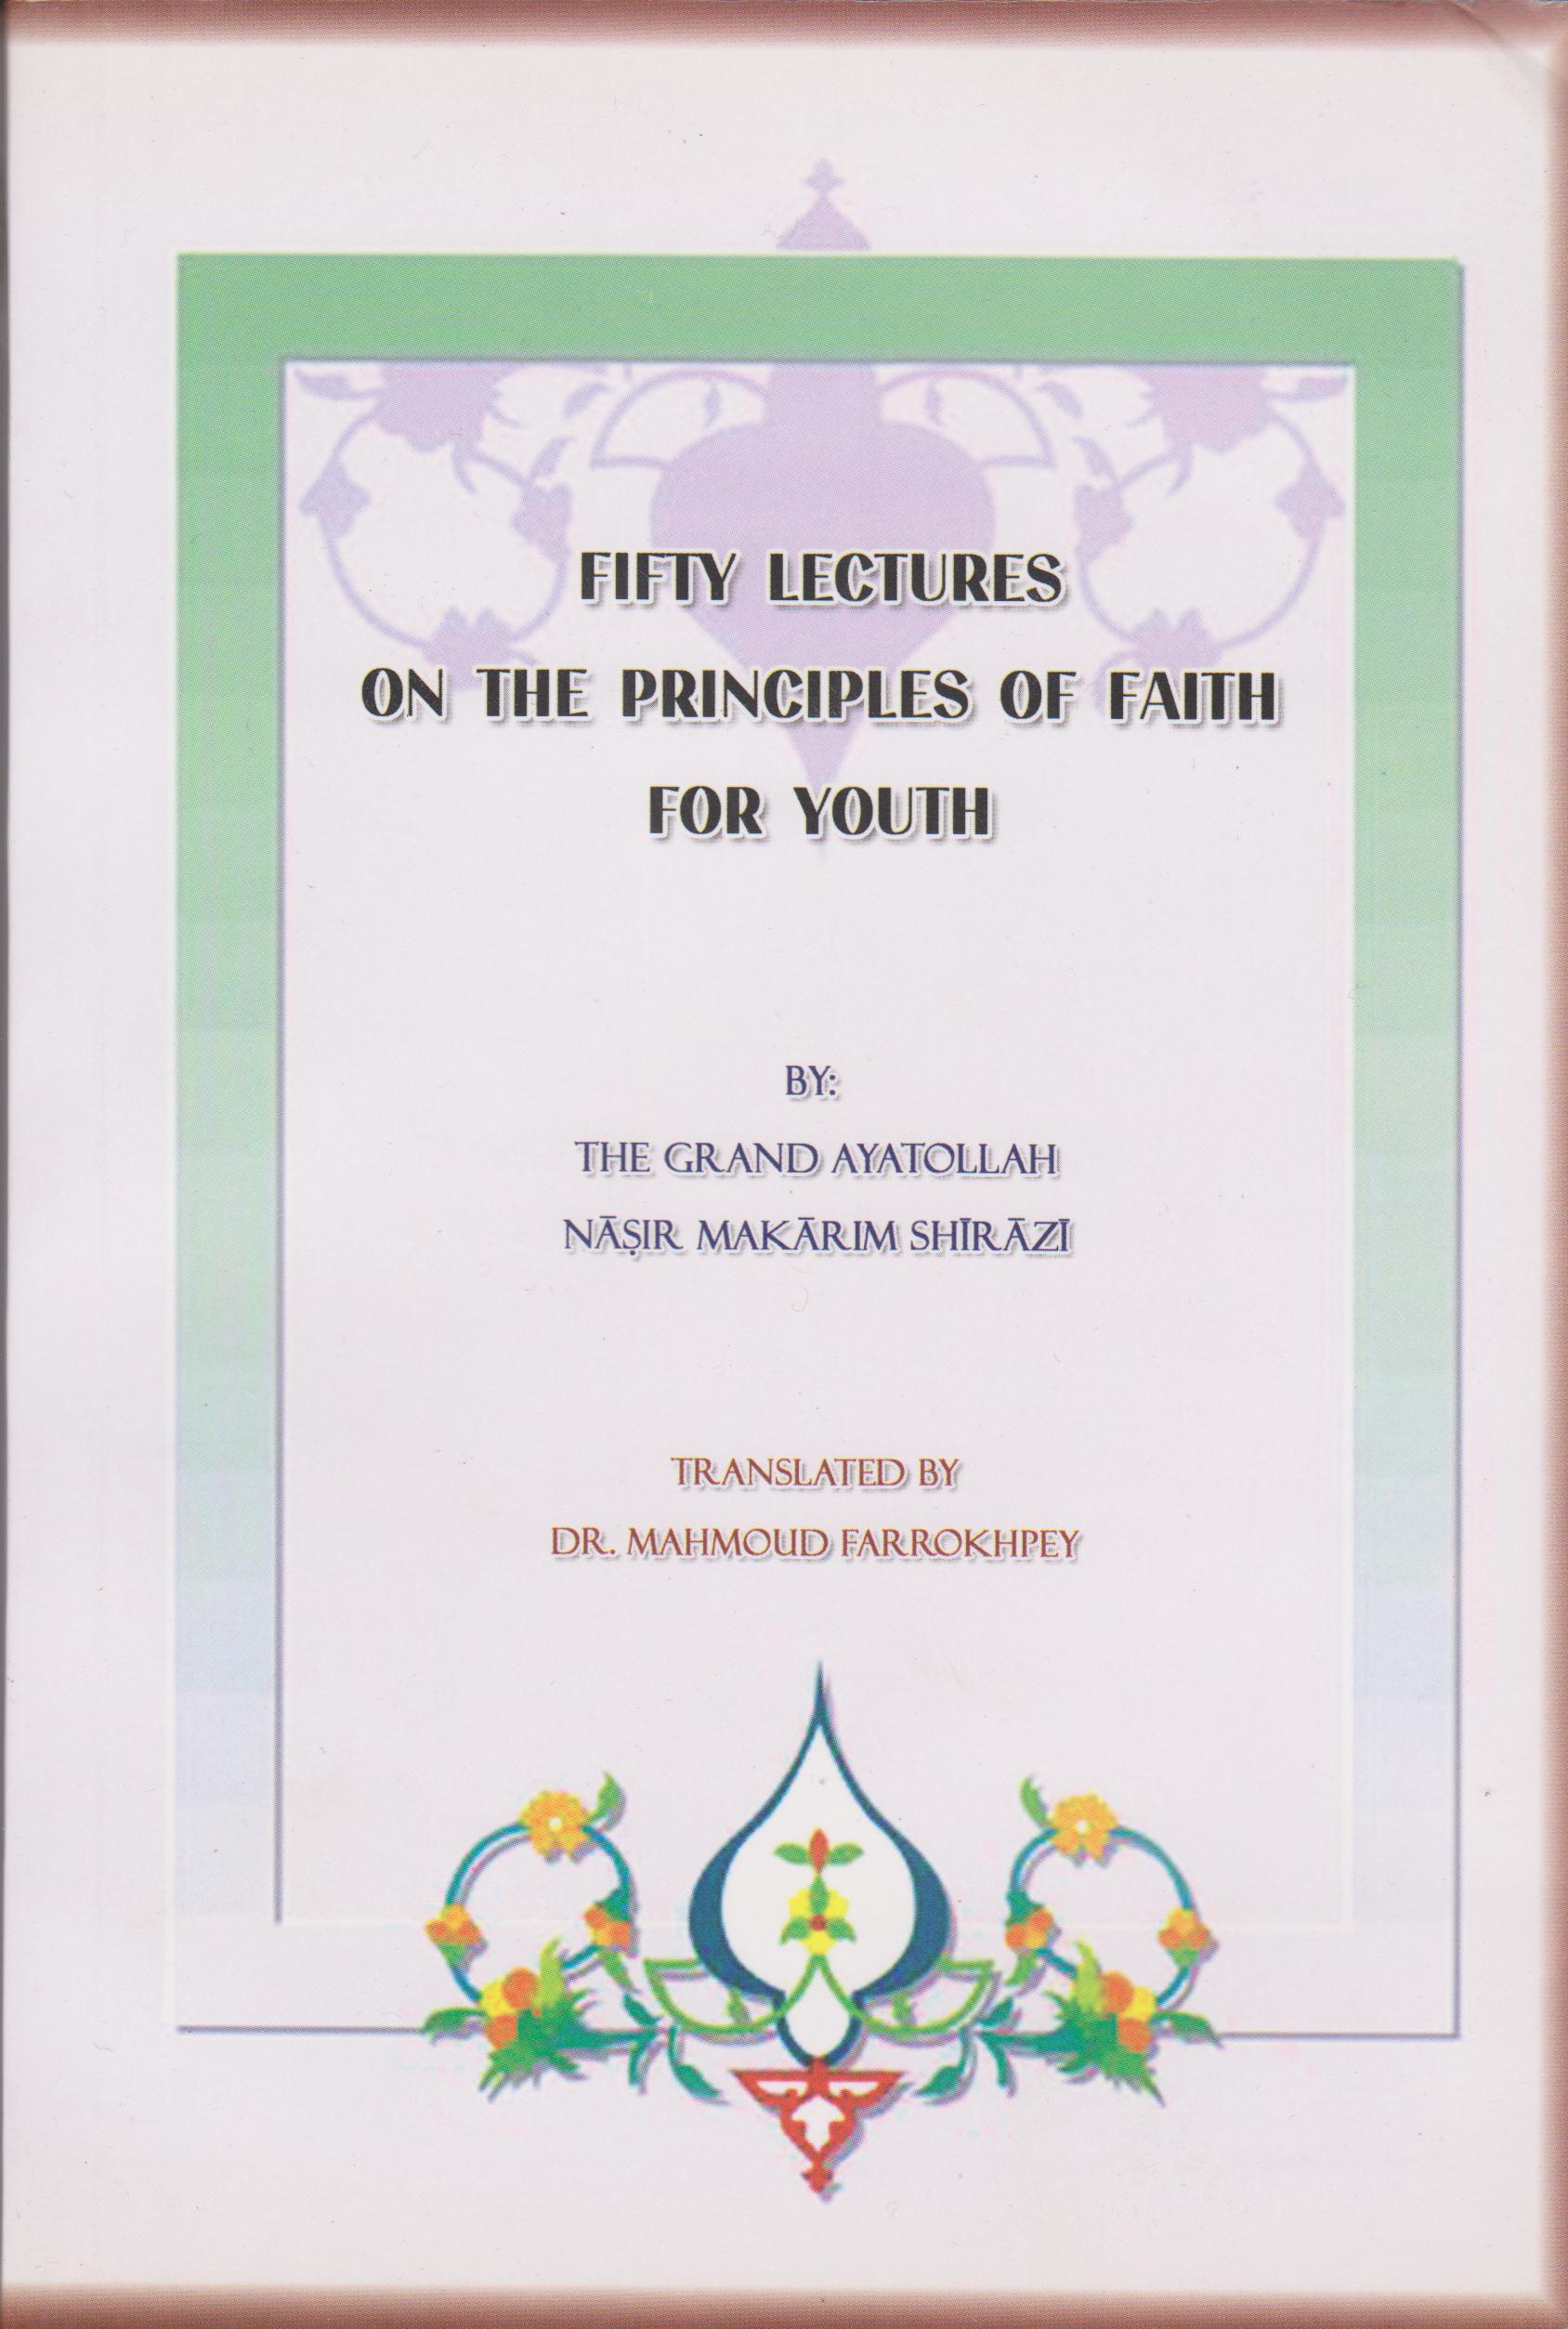 Fifty Lectures on The Principles of Faith for Youth